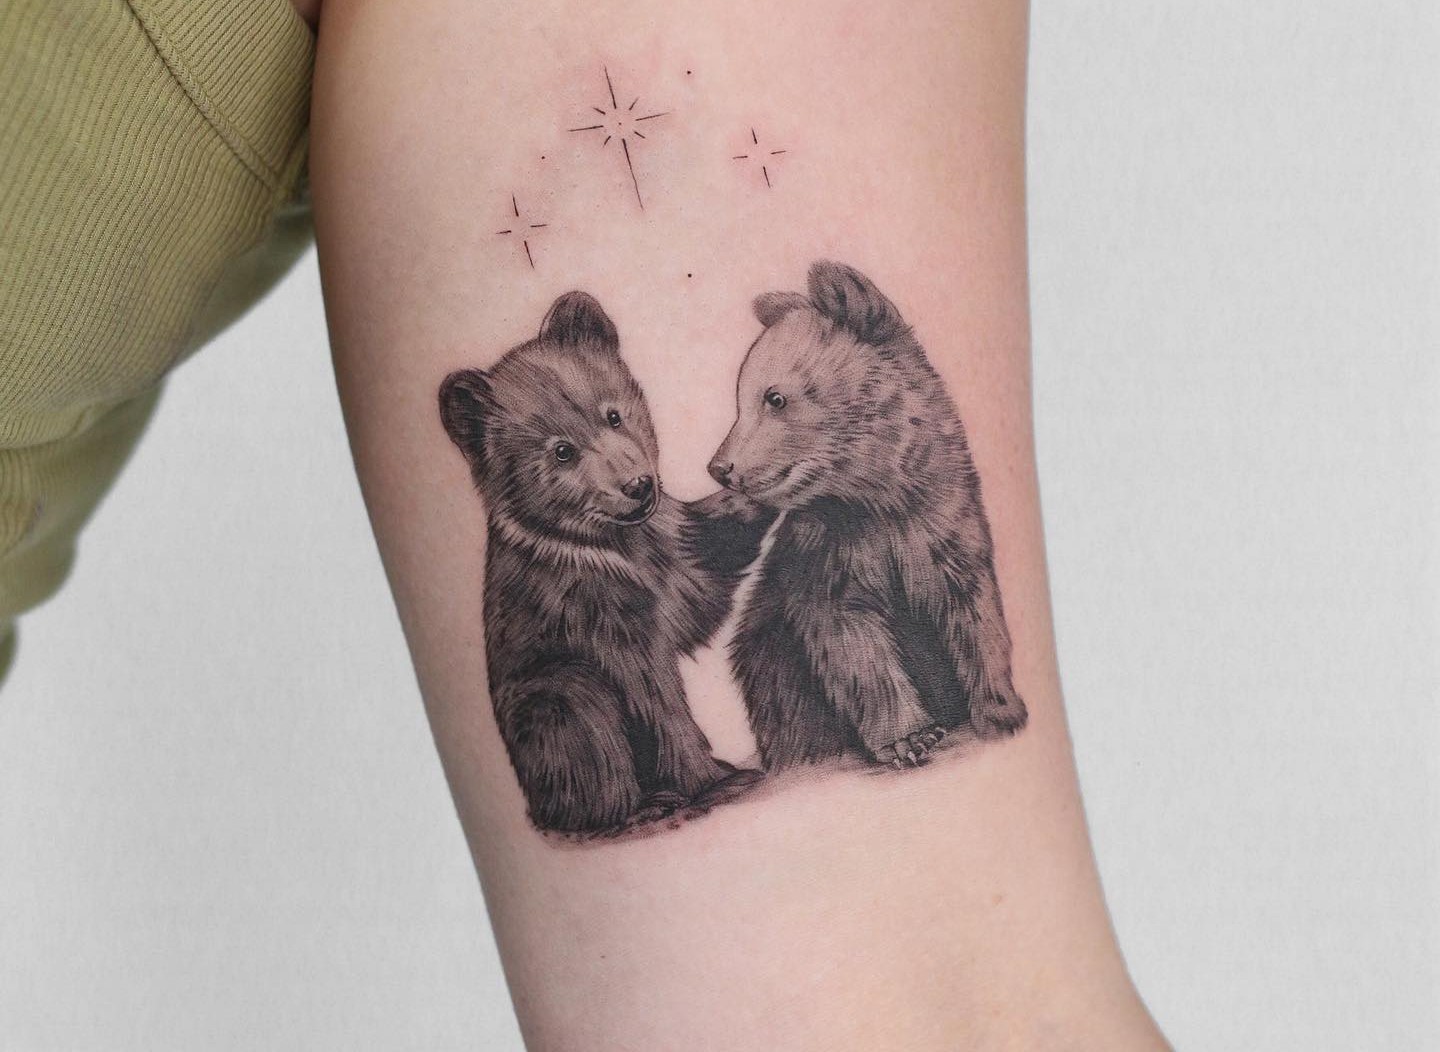 Me and my friend got matching Gummy bear ankle tattoos at rattattooee in  Upton upon Severn worcestershire Done by Paul  rtattoos